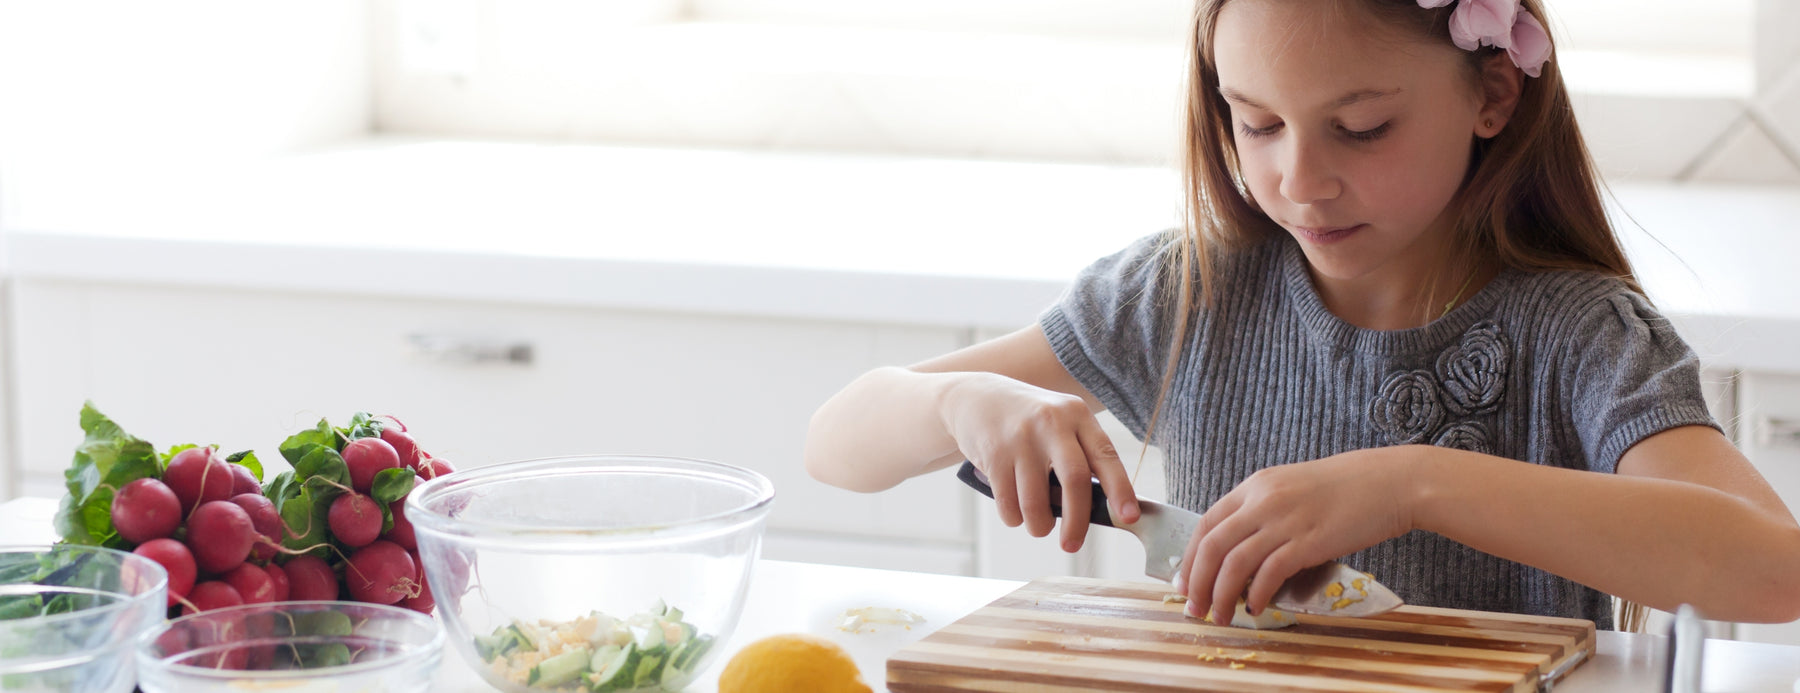 10 benefits of cooking with your child